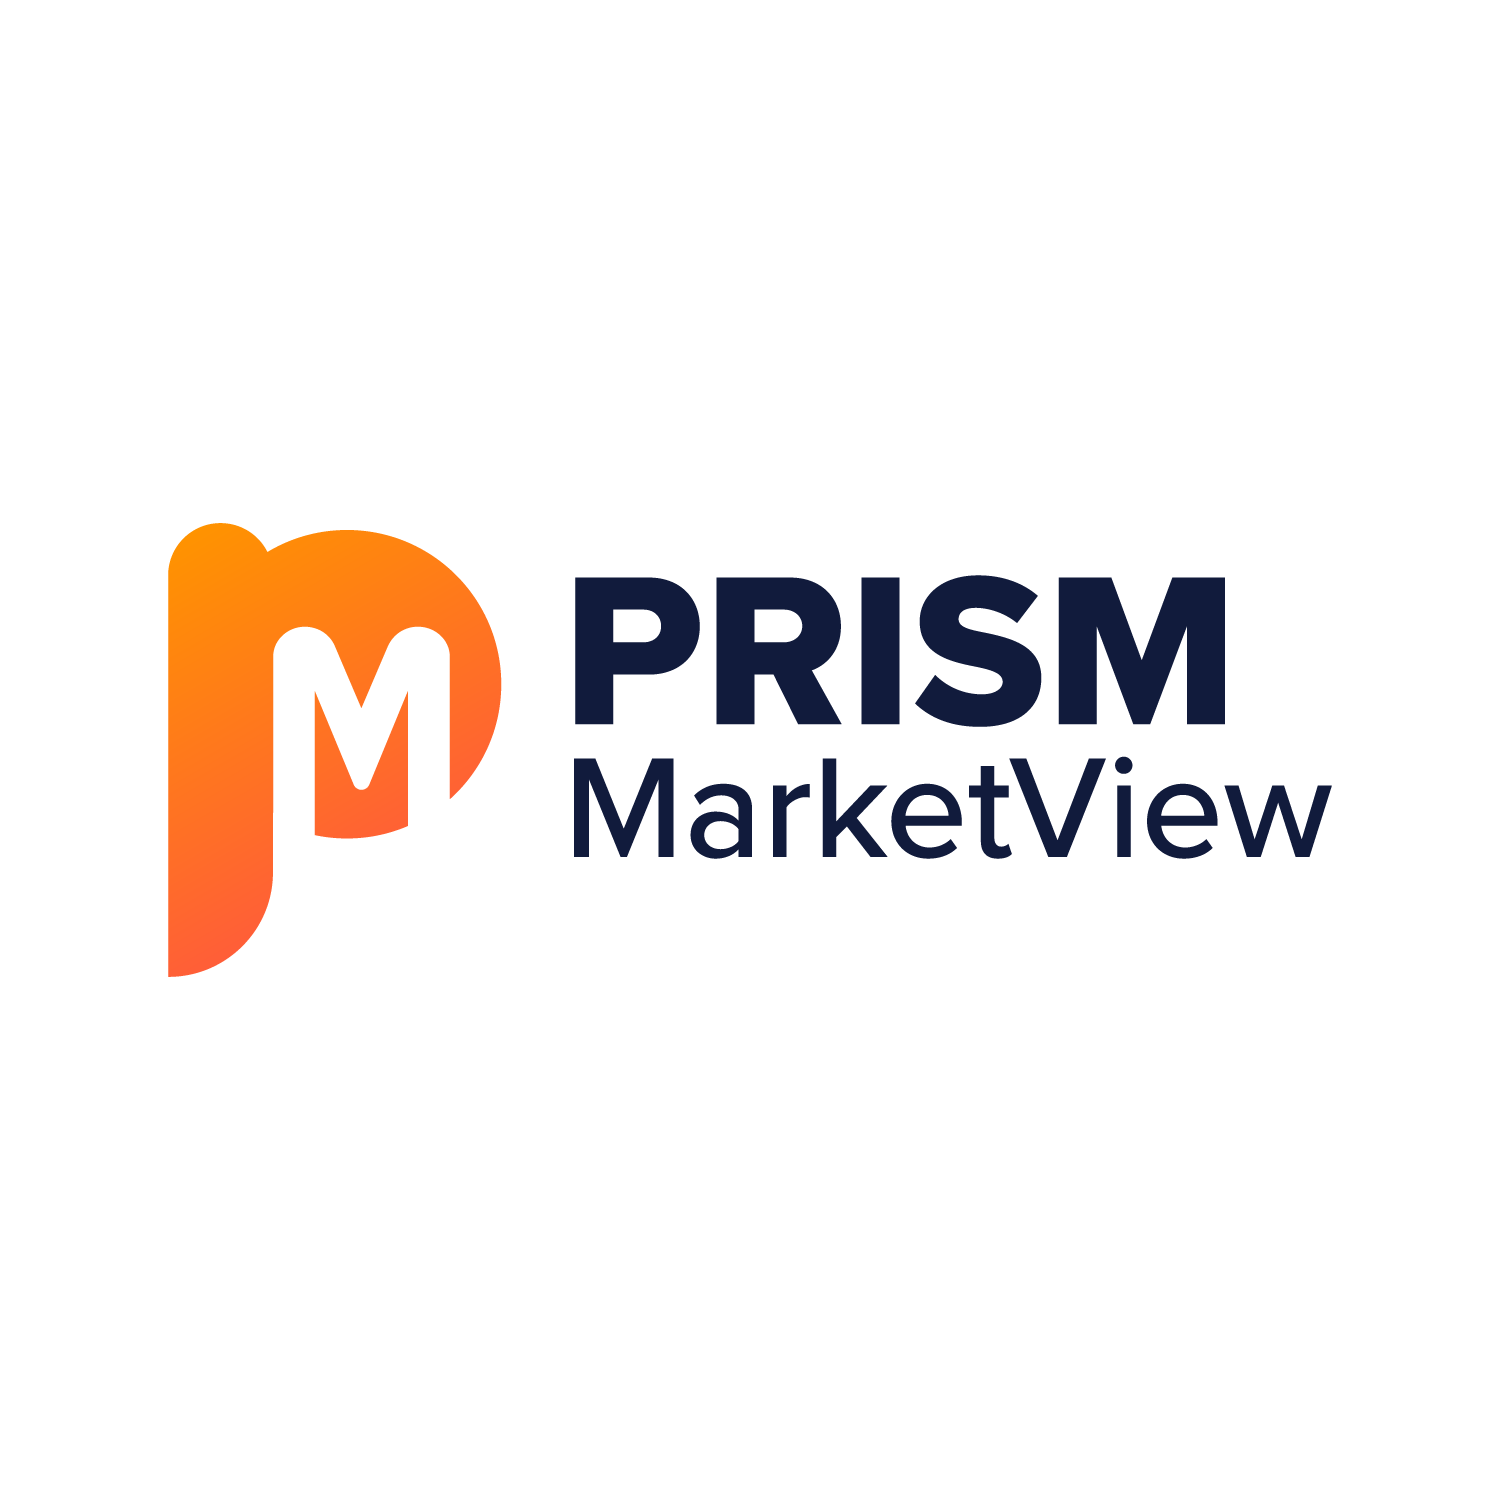 Tesla's Position and Green Stock Downturn Highlight Challenges in EV Sector: PRISM MarketView Analysis